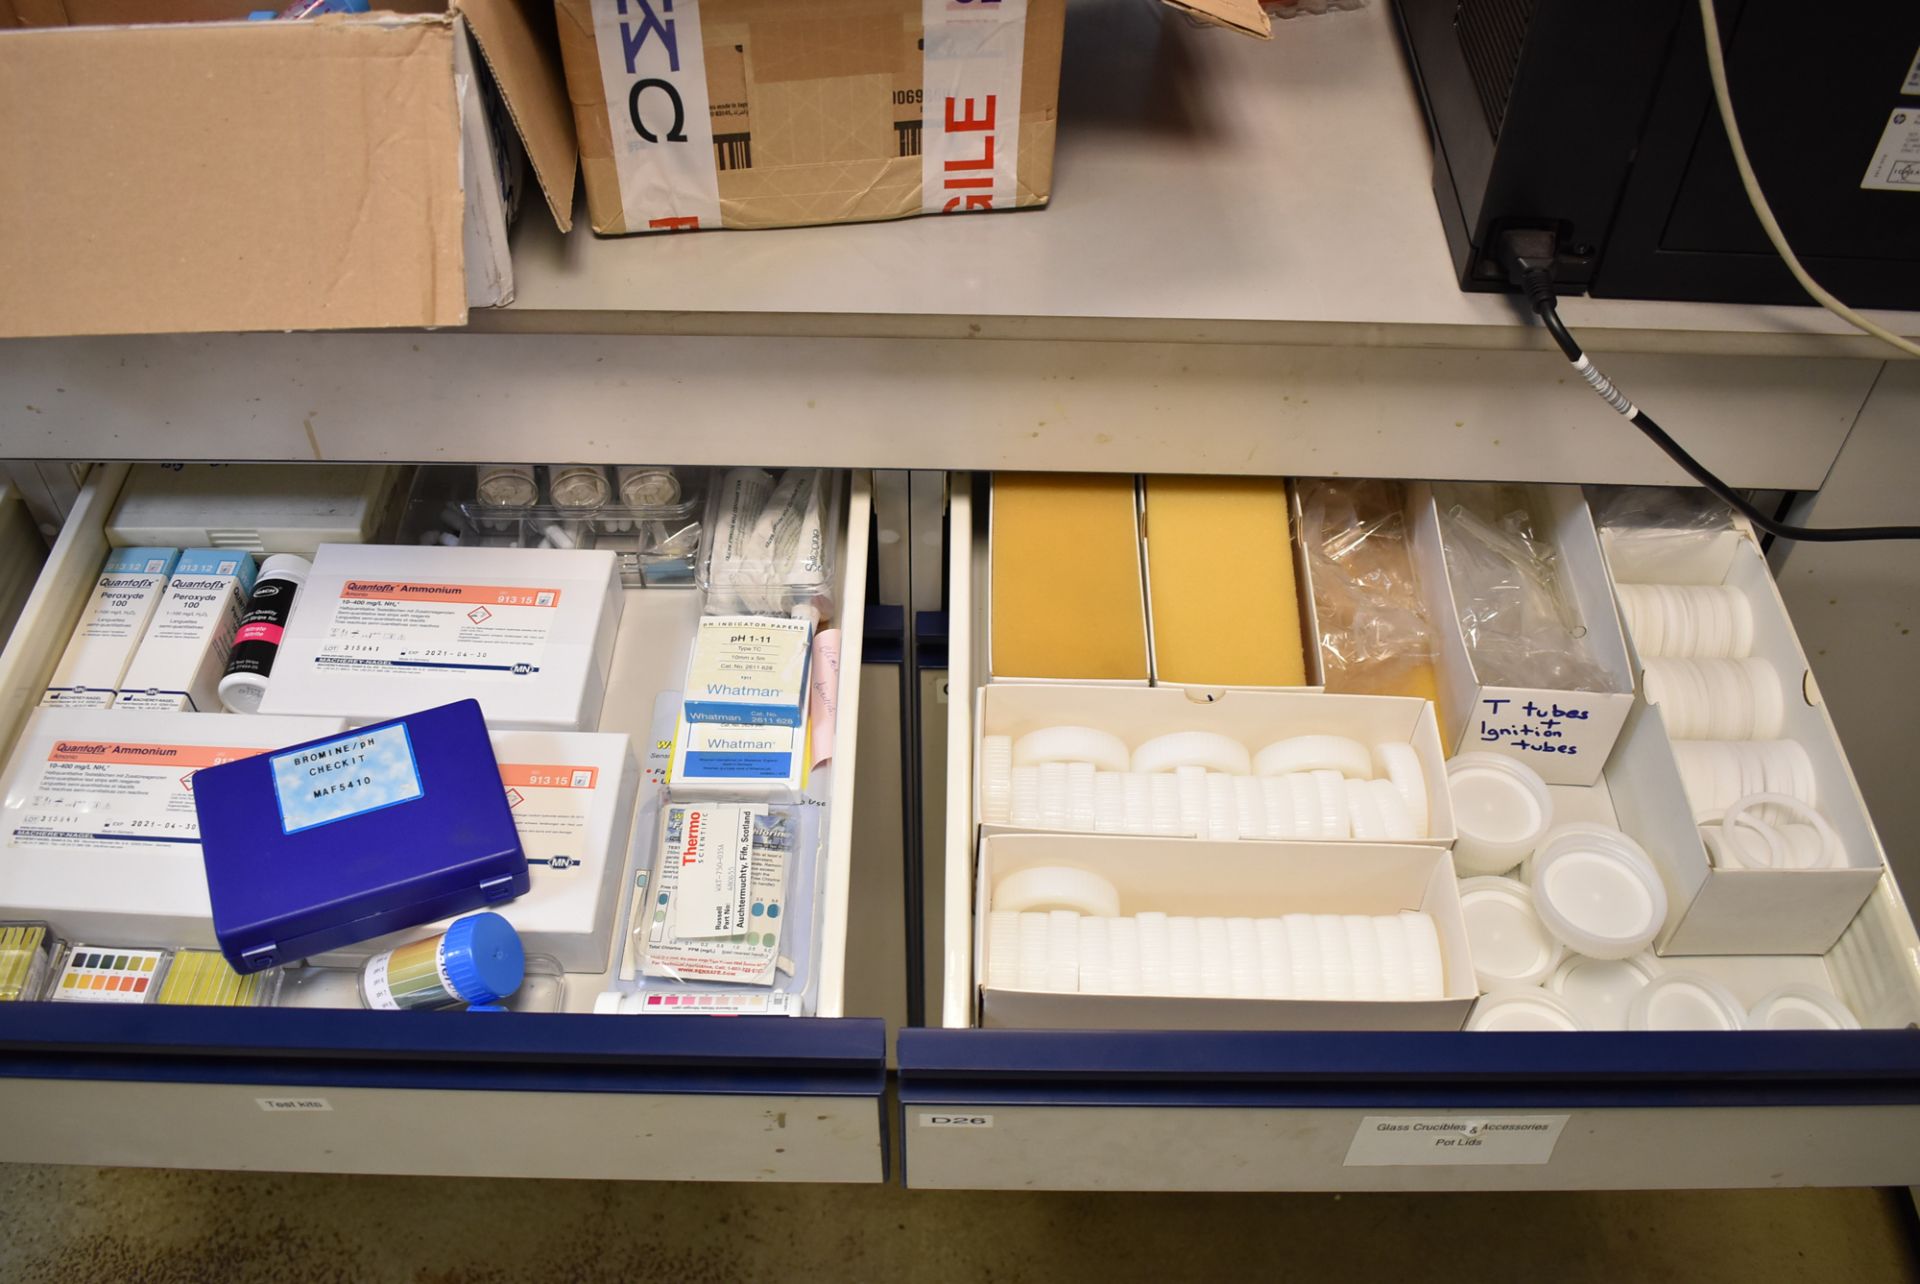 LOT/ 3 SECTION LAB STORAGE CABINET WITH CONTENTS - TEST KITS, GLASSWARE, PLASTIC PODS (ROOM 264) [ - Image 2 of 3